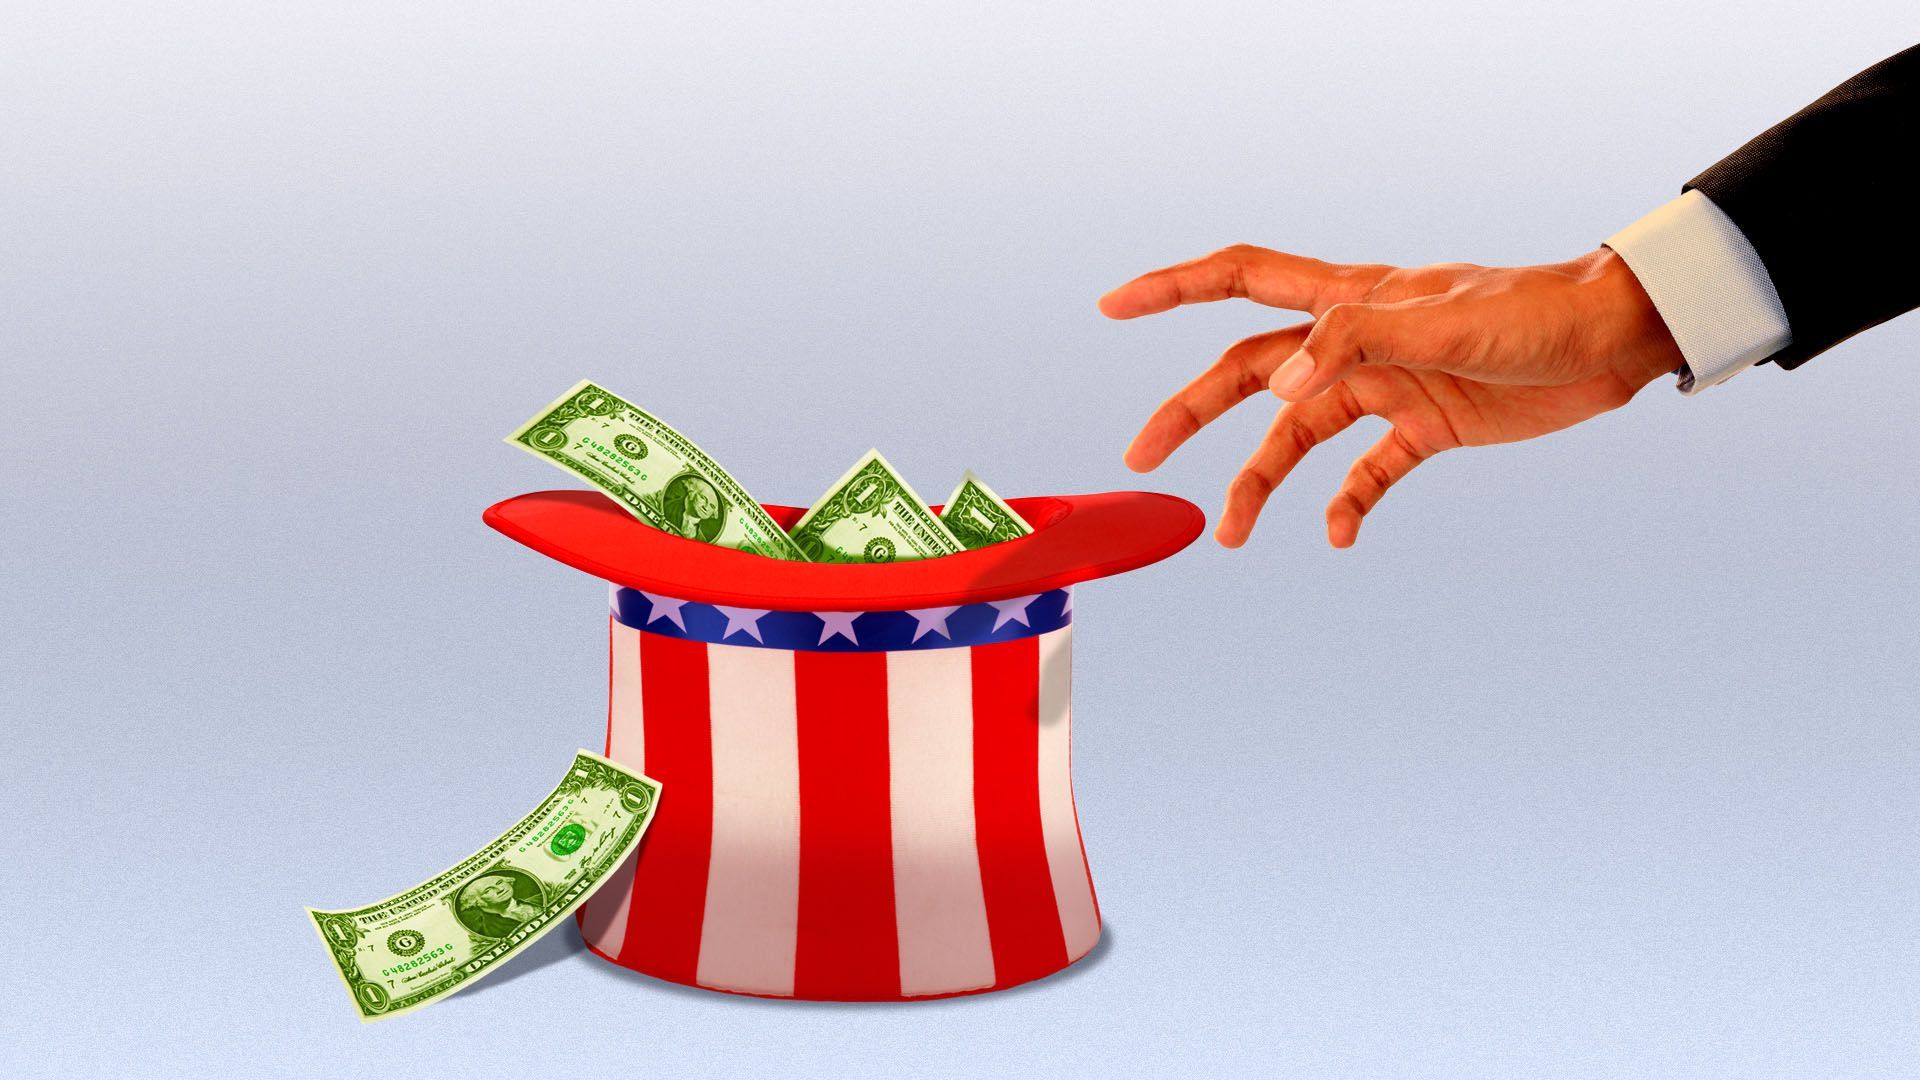 Illustration of a hand in a suit reaching for an uncle Sam hat filled with money